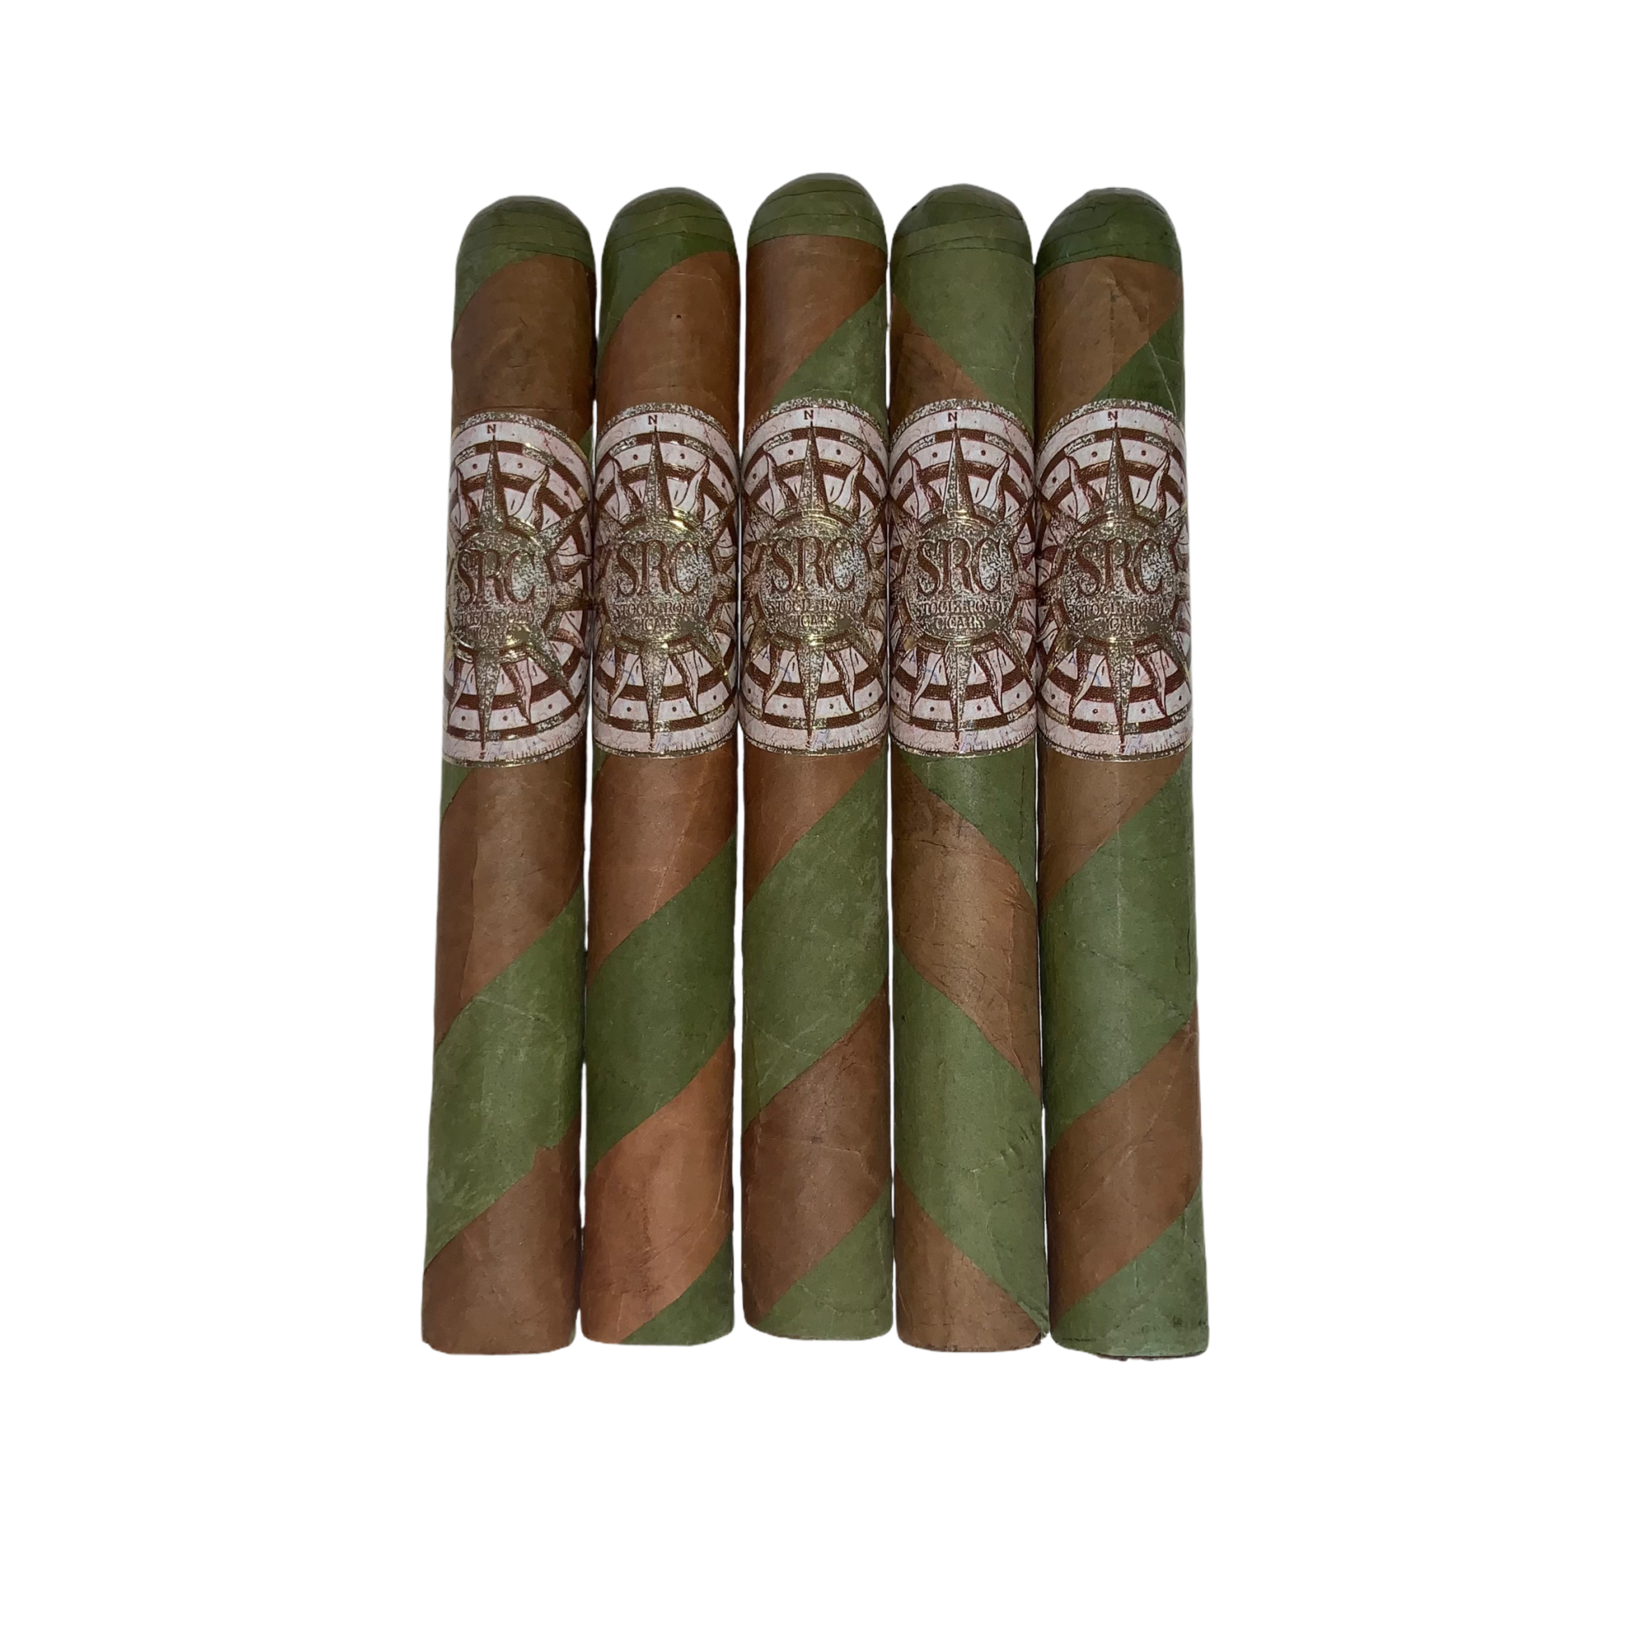 Stogie Road Cigars Sweet Grass Gringo by Stogie Road